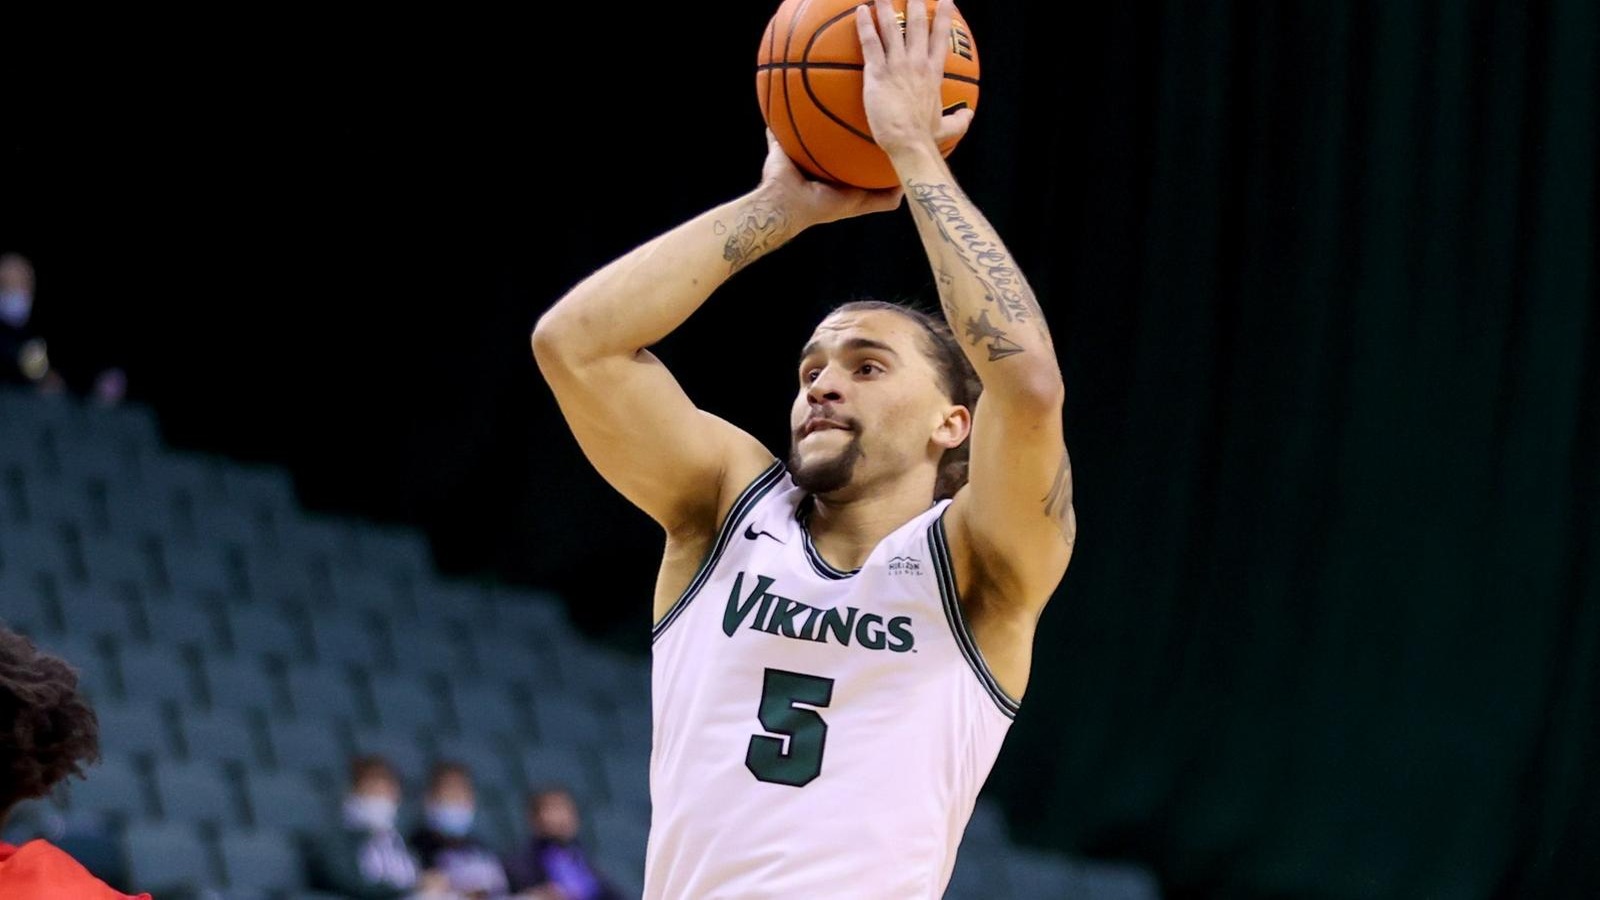 Cleveland State Men's Basketball Opens Home Slate Against Ohio Saturday